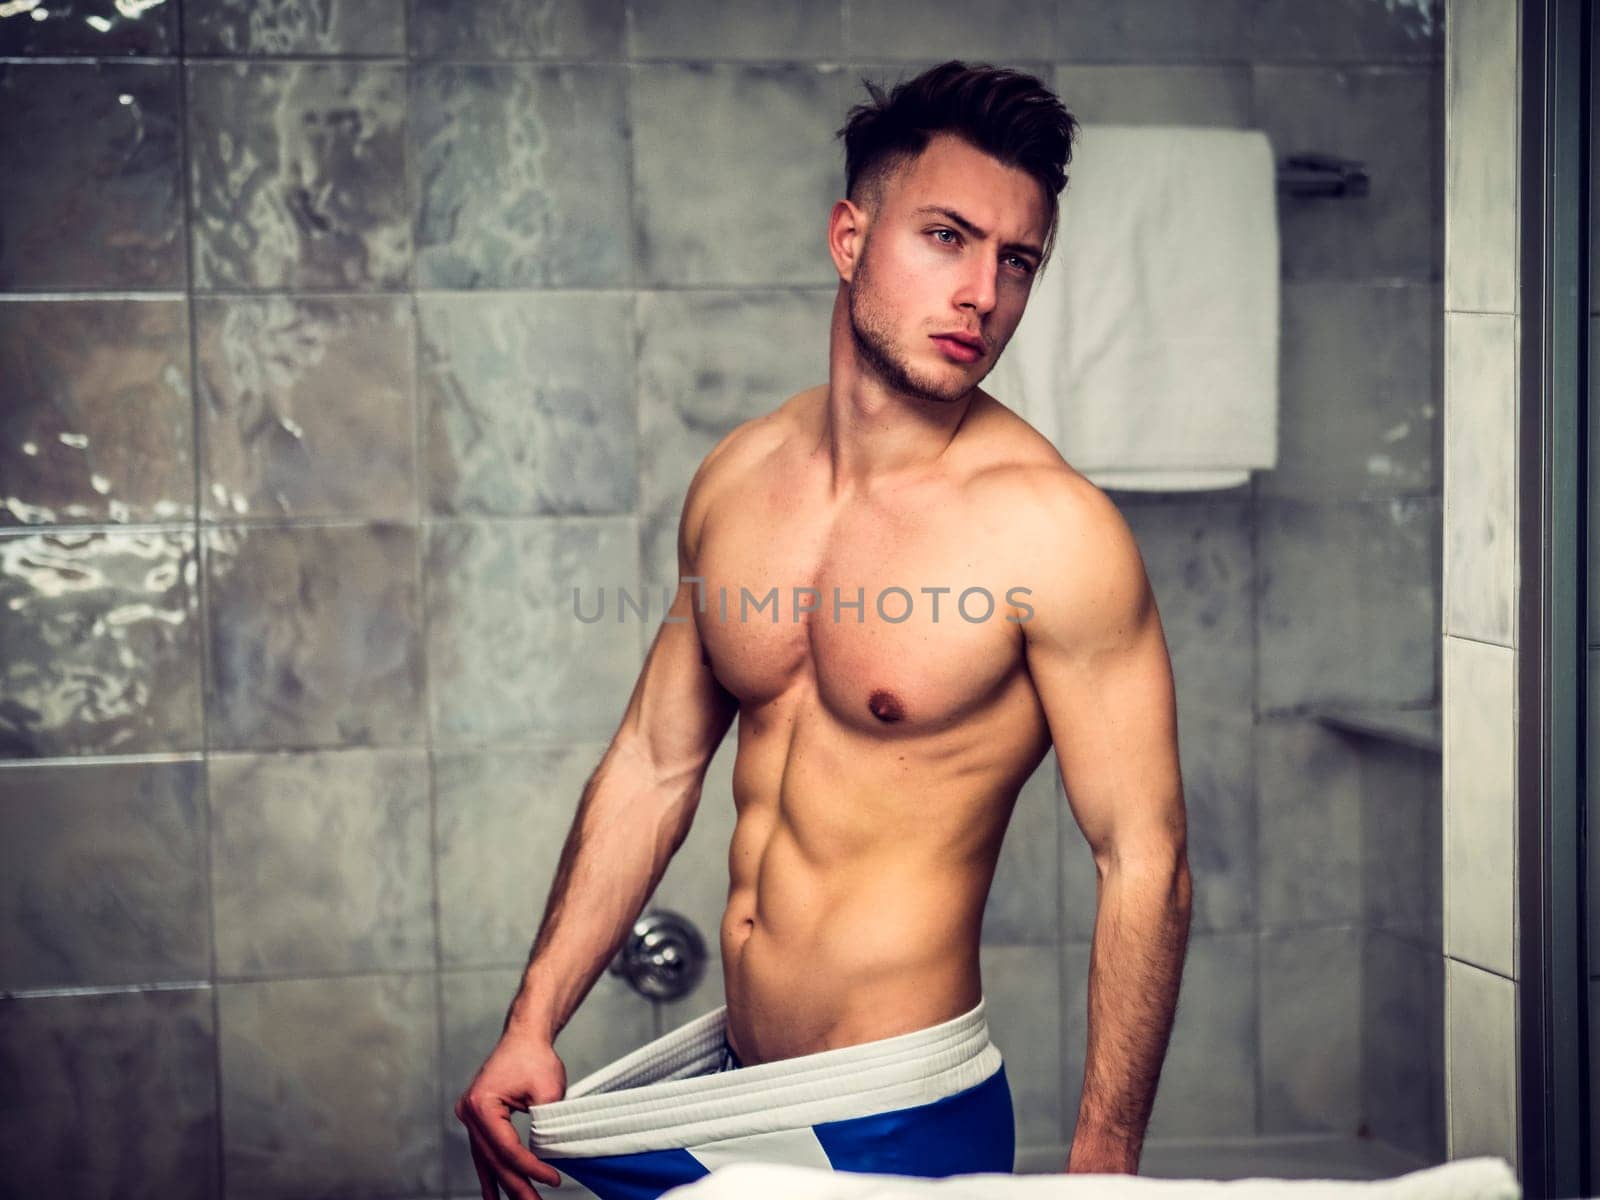 Photo of a shirtless man standing in front of a shower by artofphoto